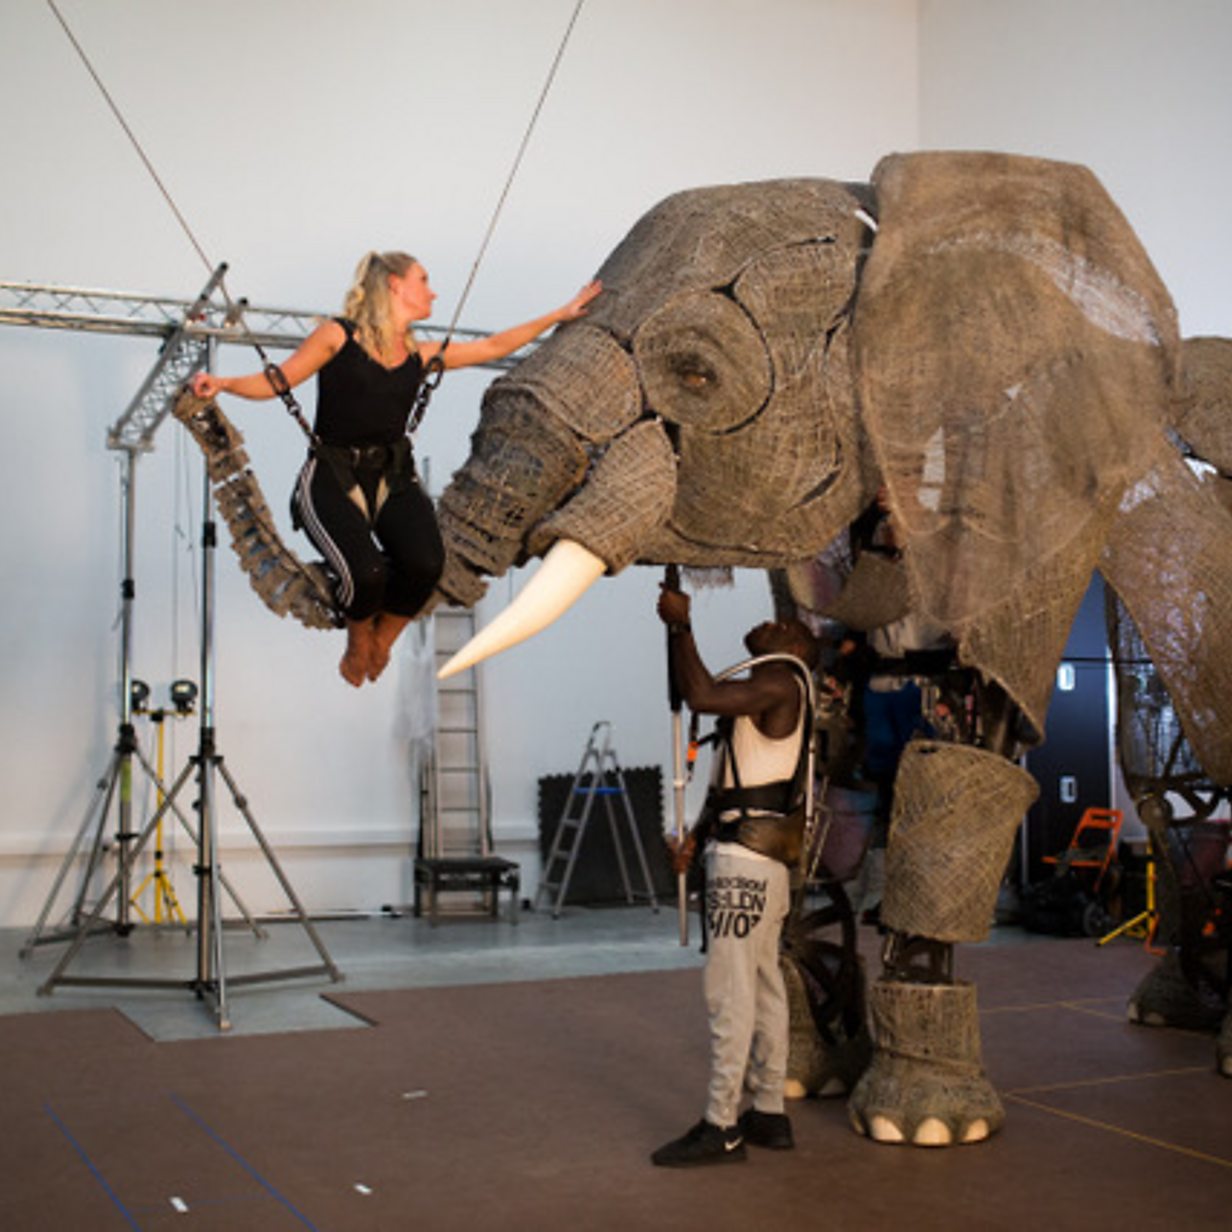 The (puppet) elephant in the room is at Paris Theater, Kats, Entertainment